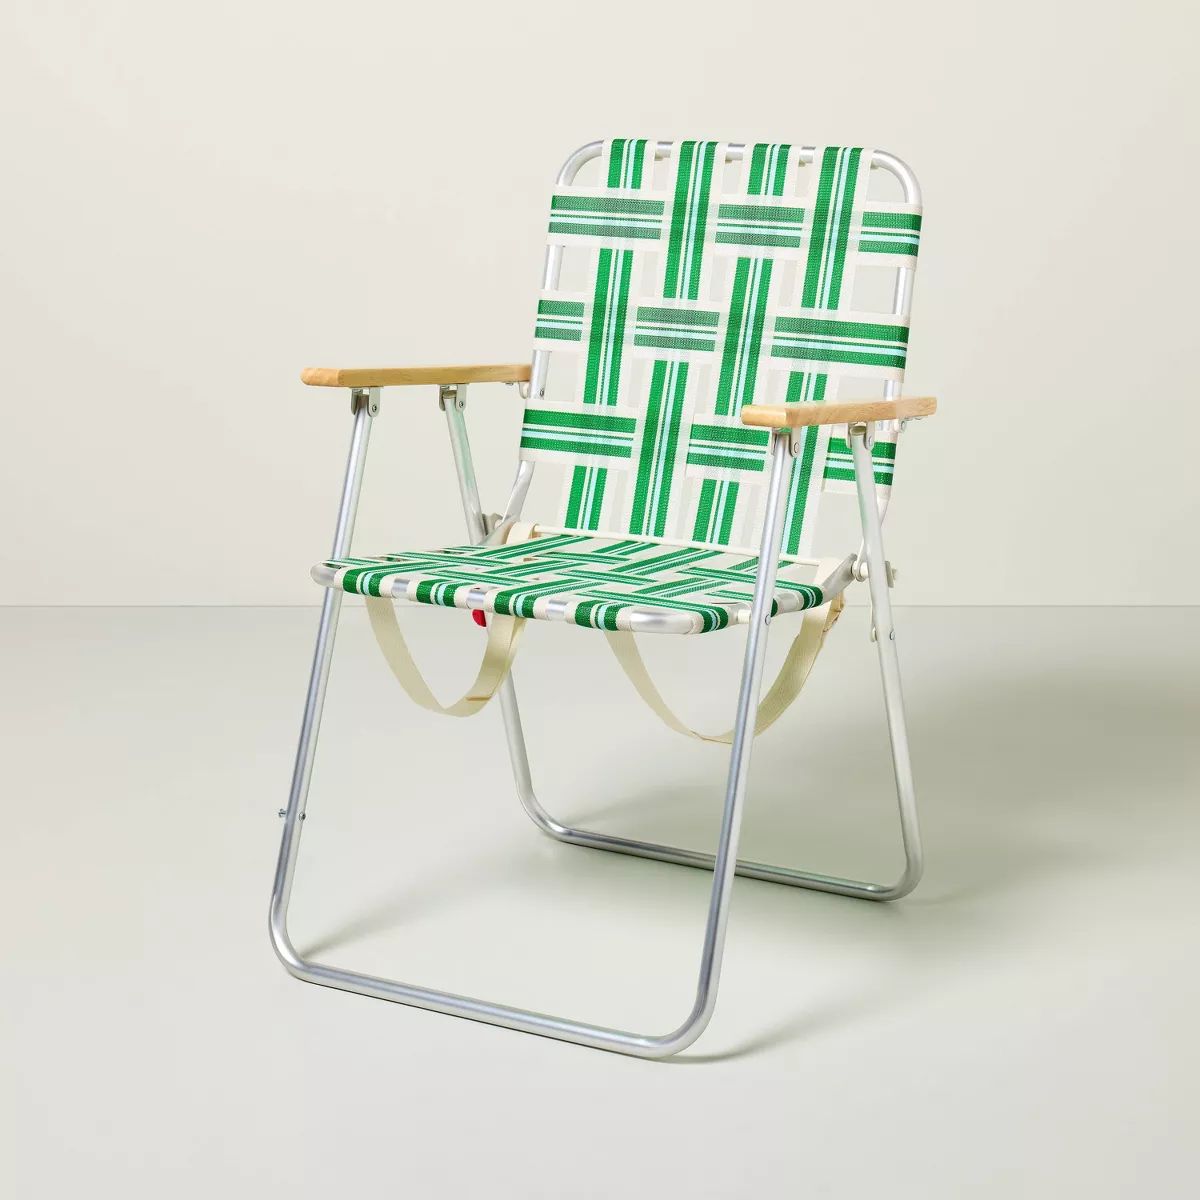 Folding Lawn Chair - Cream/Light Blue/Green - Hearth & Hand™ with Magnolia | Target